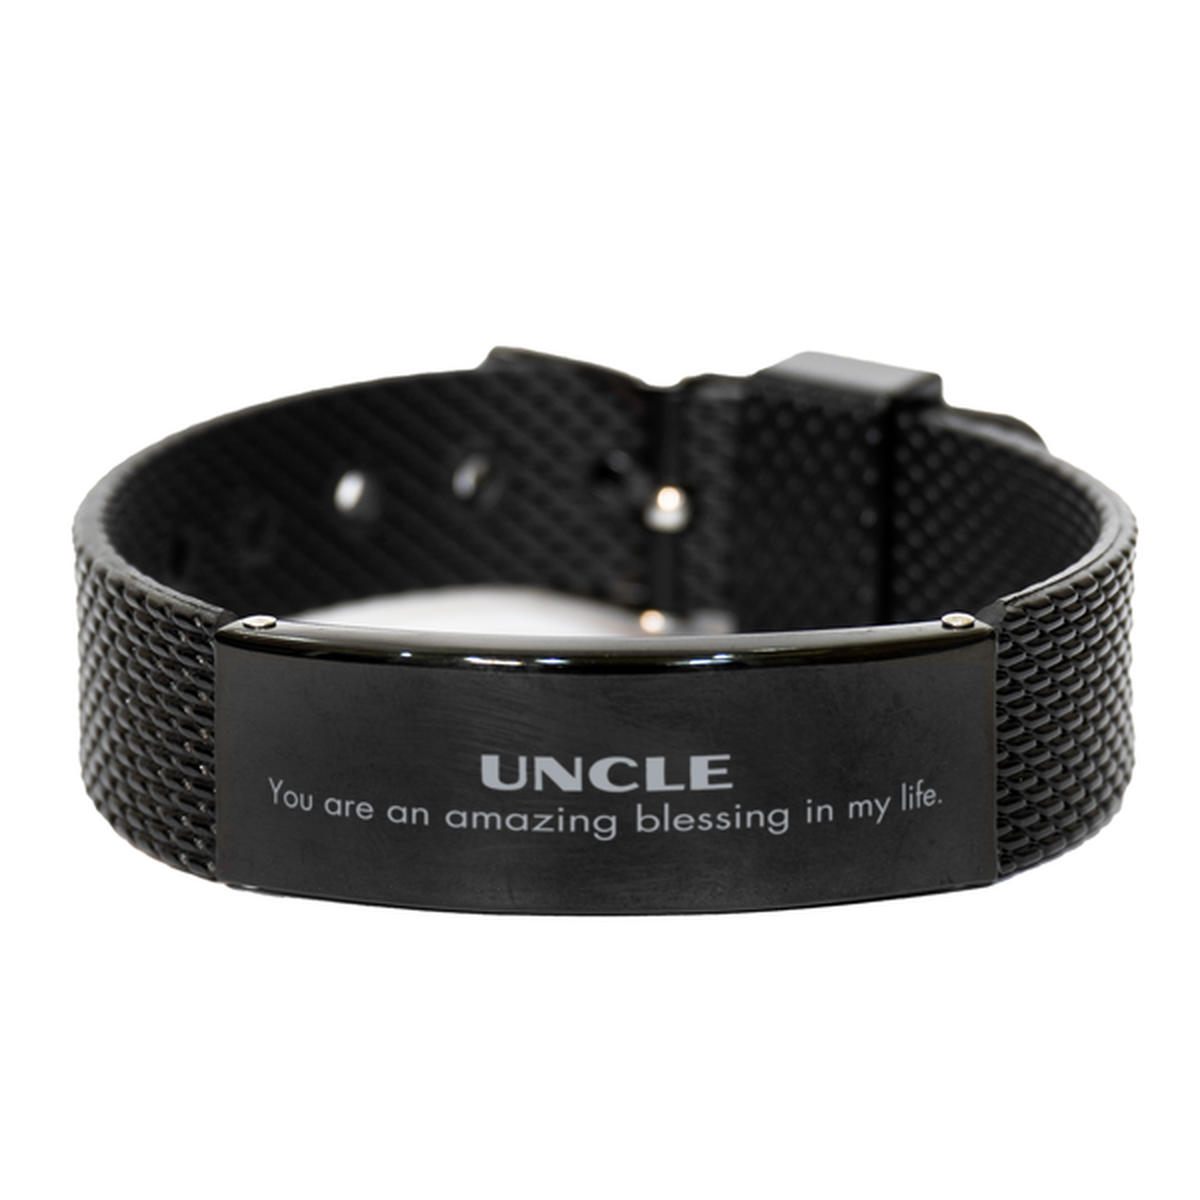 Uncle Black Shark Mesh Bracelet, You are an amazing blessing in my life, Thank You Gifts For Uncle, Inspirational Birthday Christmas Unique Gifts For Uncle